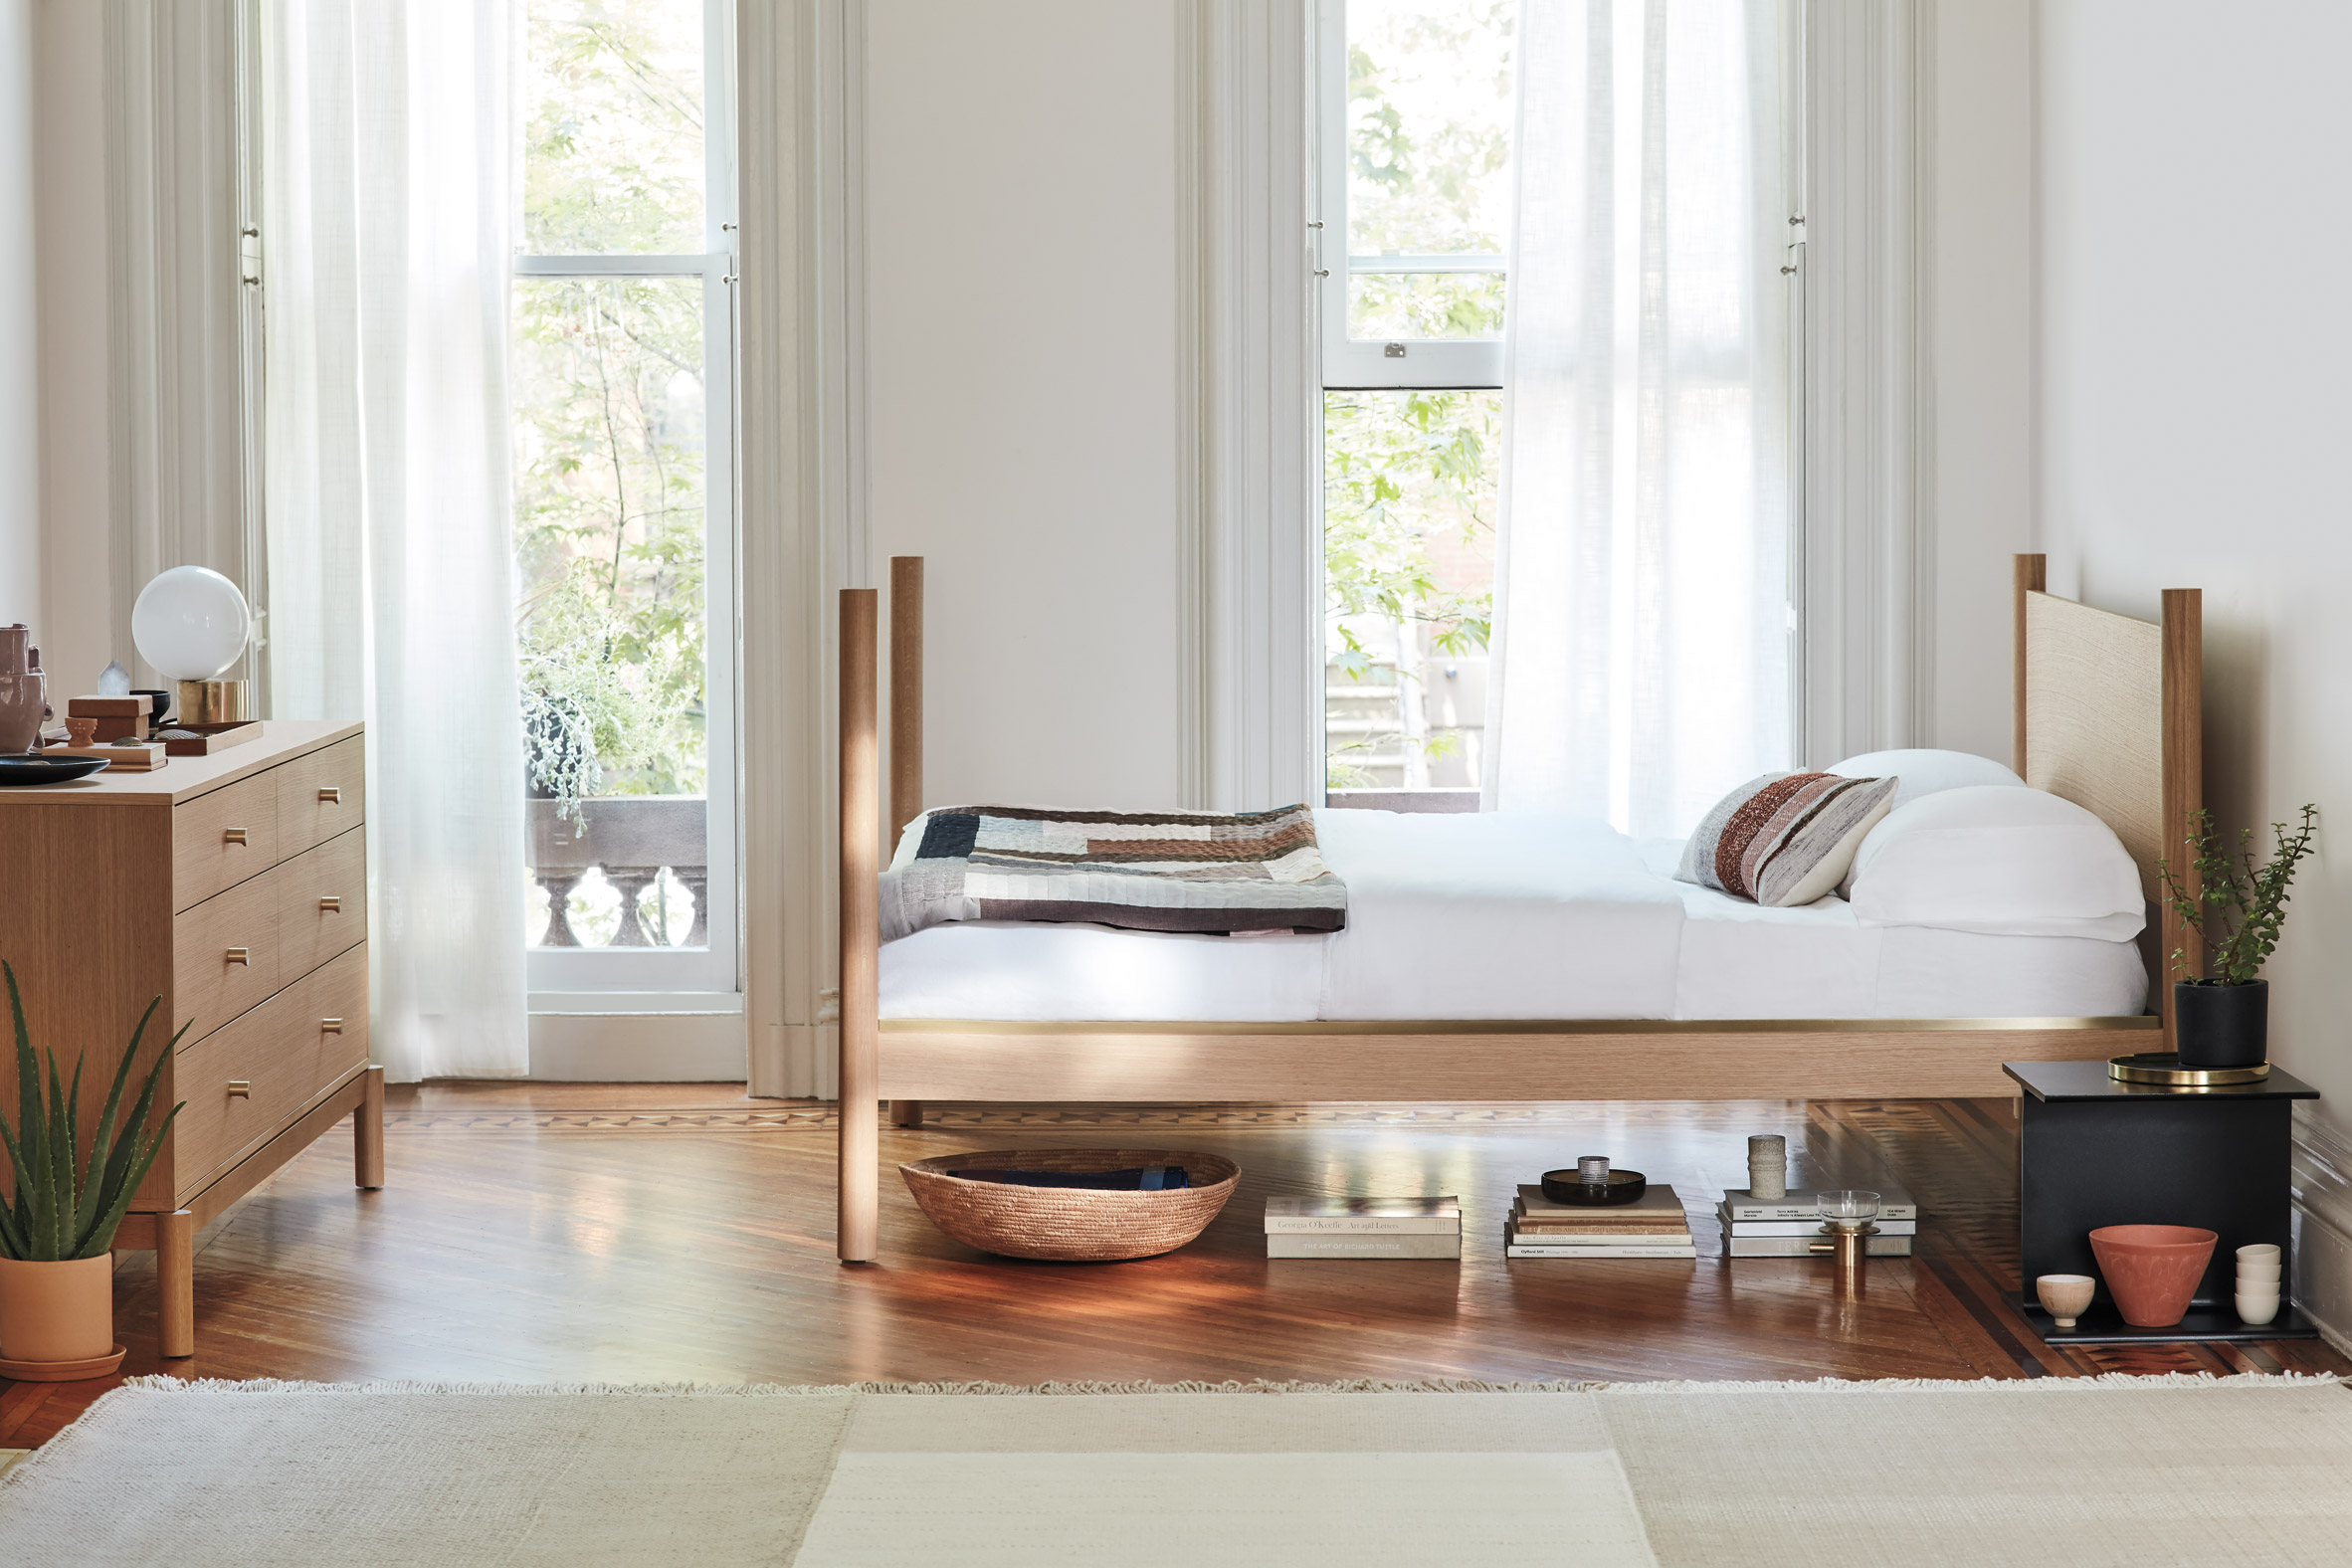 Anastassiades launched a bedroom collection with Herman Miller in 2019